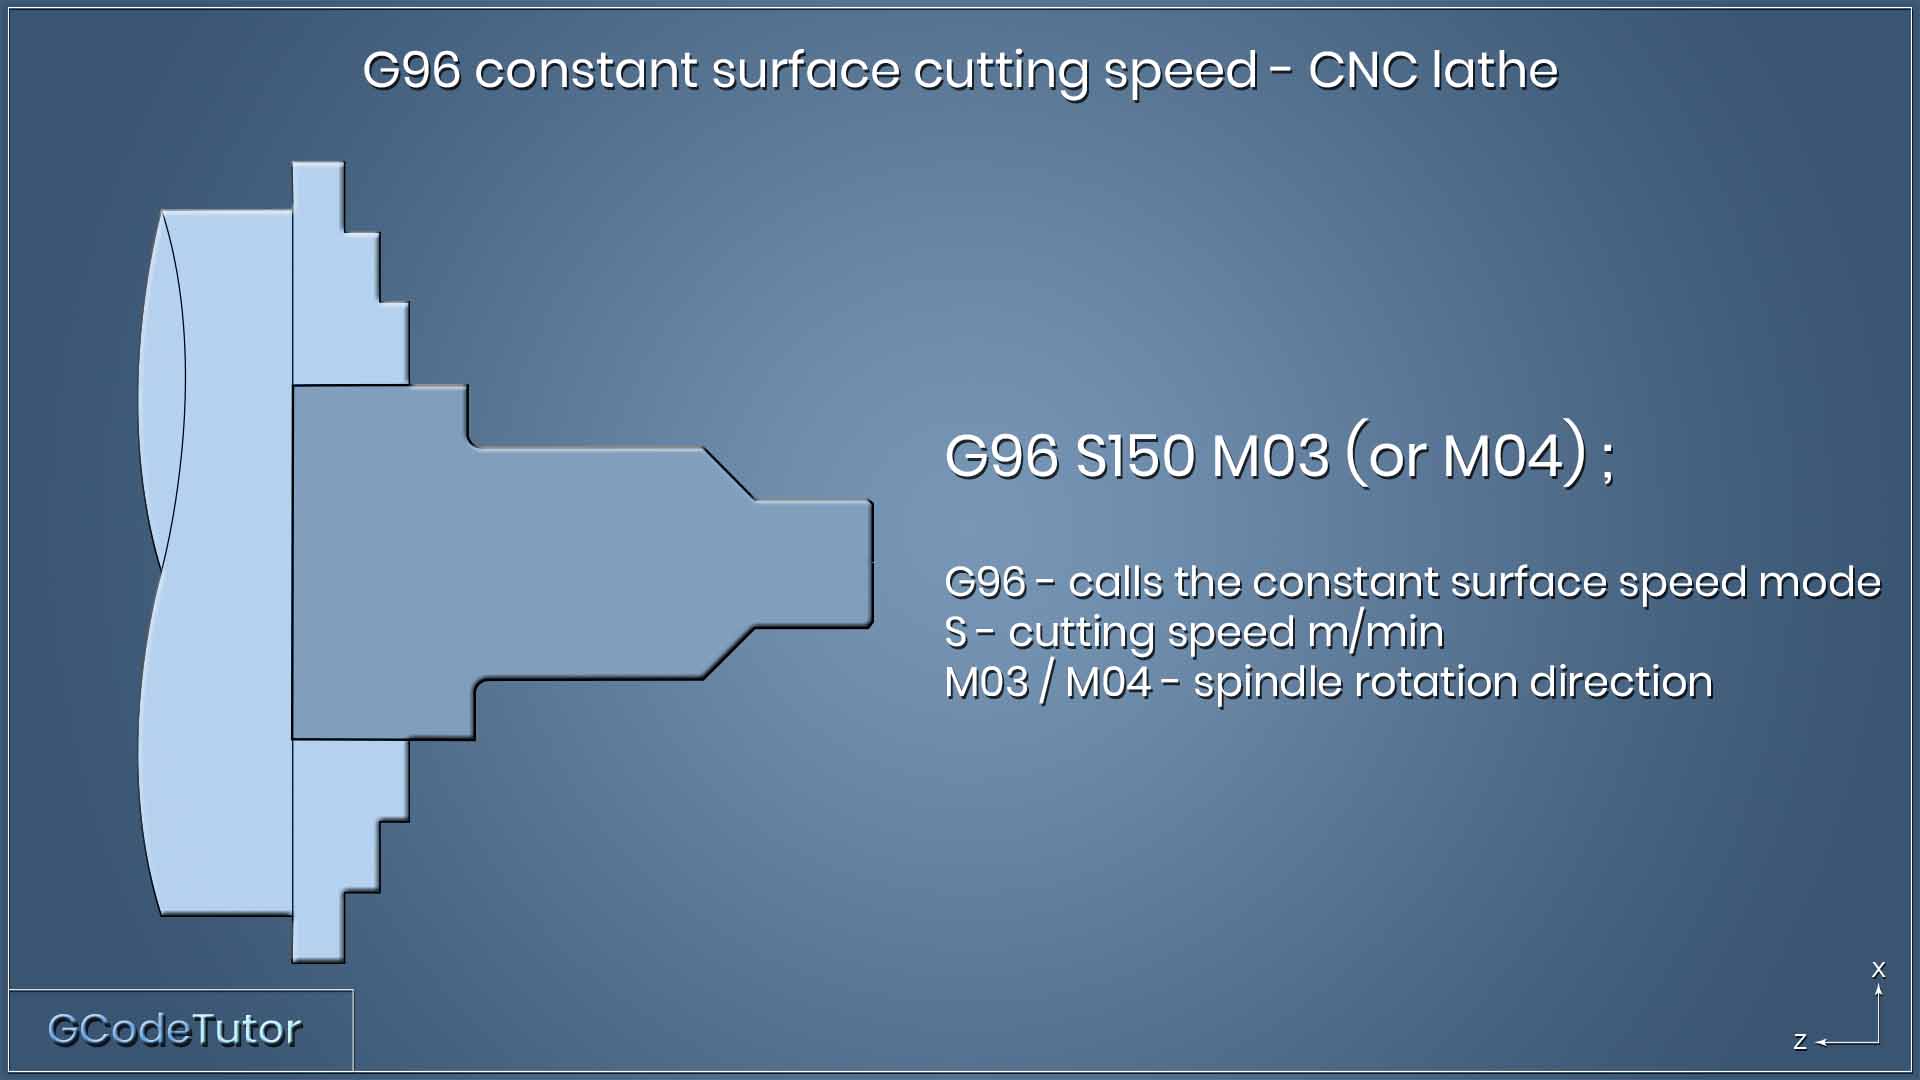 G96 constant surface cutting speed